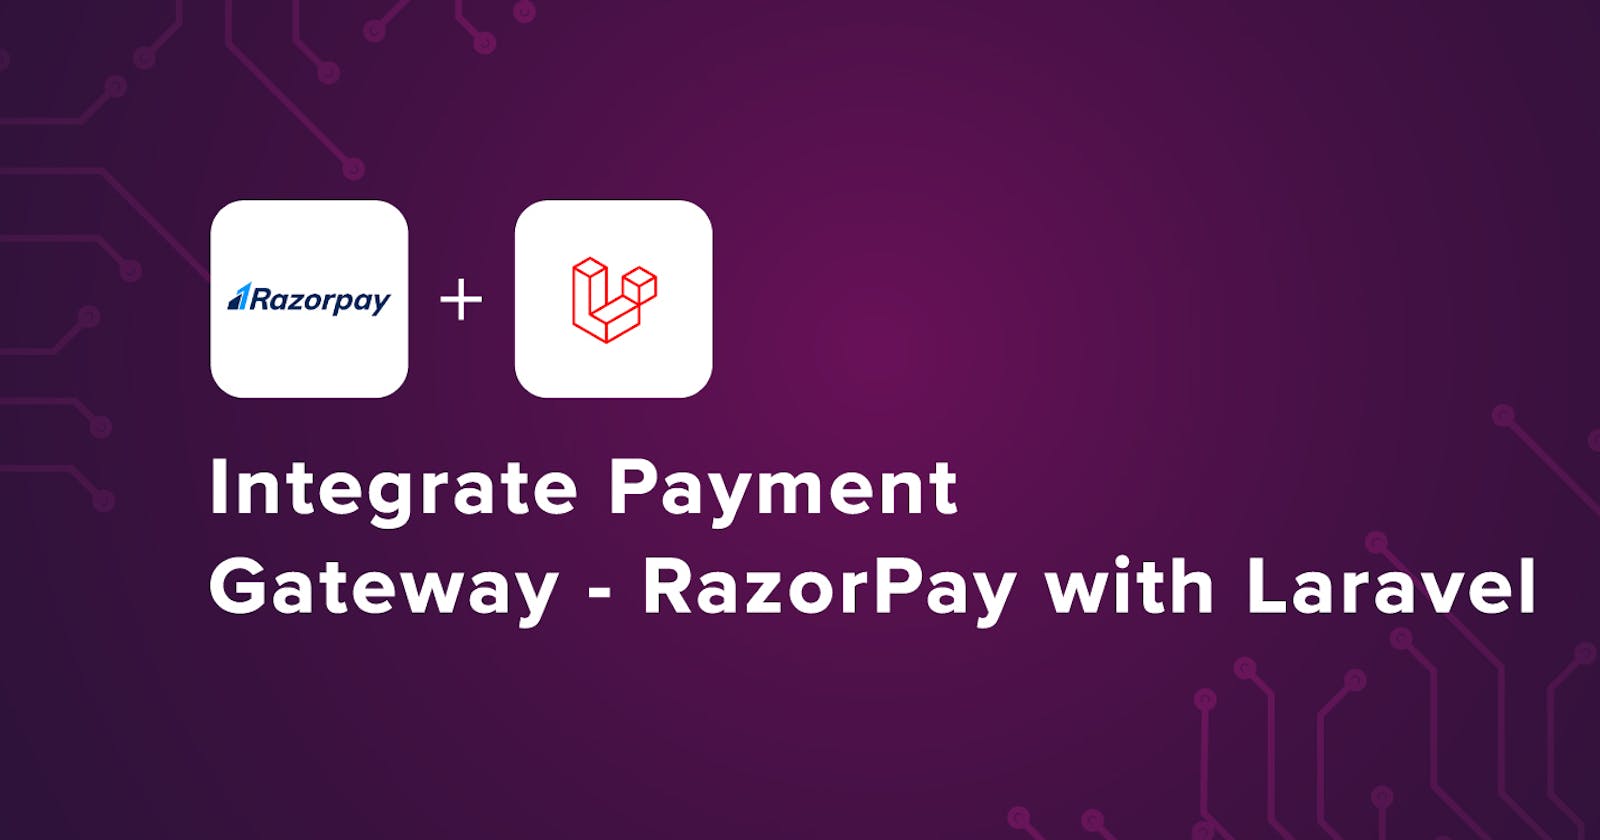 Integrate Payment Gateway - RazorPay with Laravel